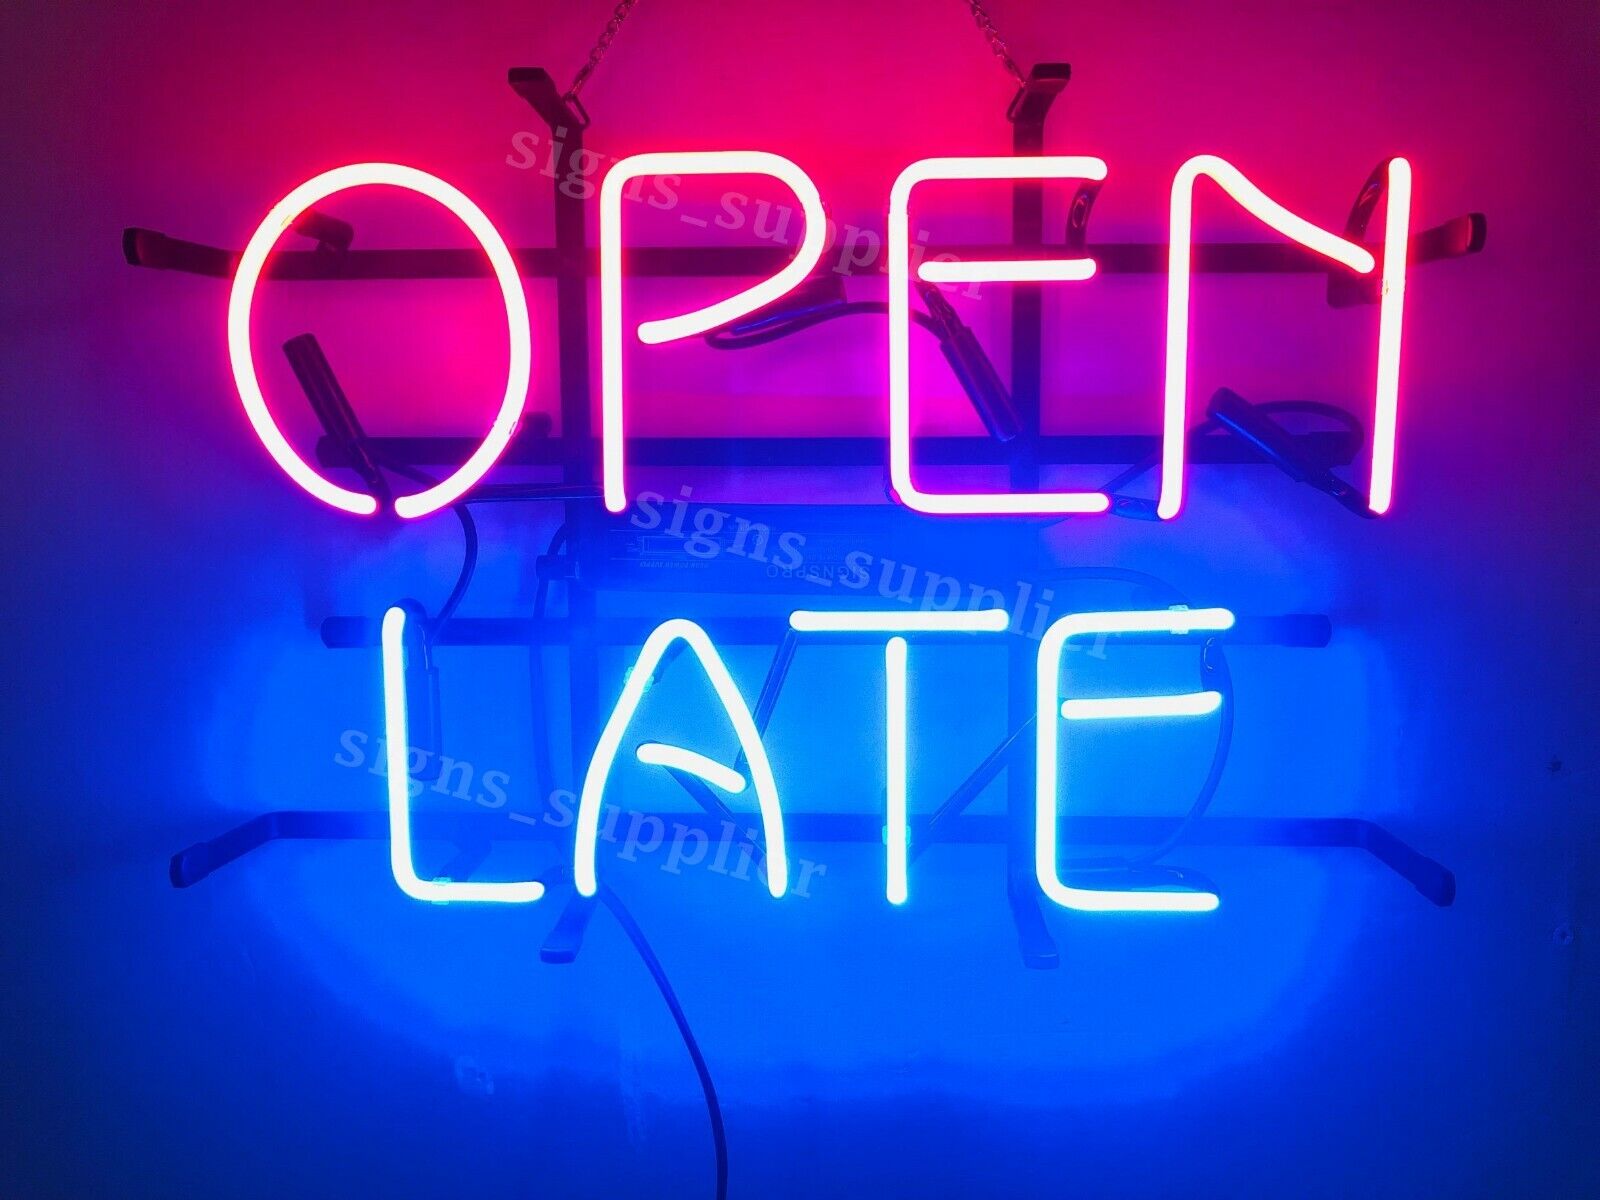 New Open Late Neon Light Sign 14